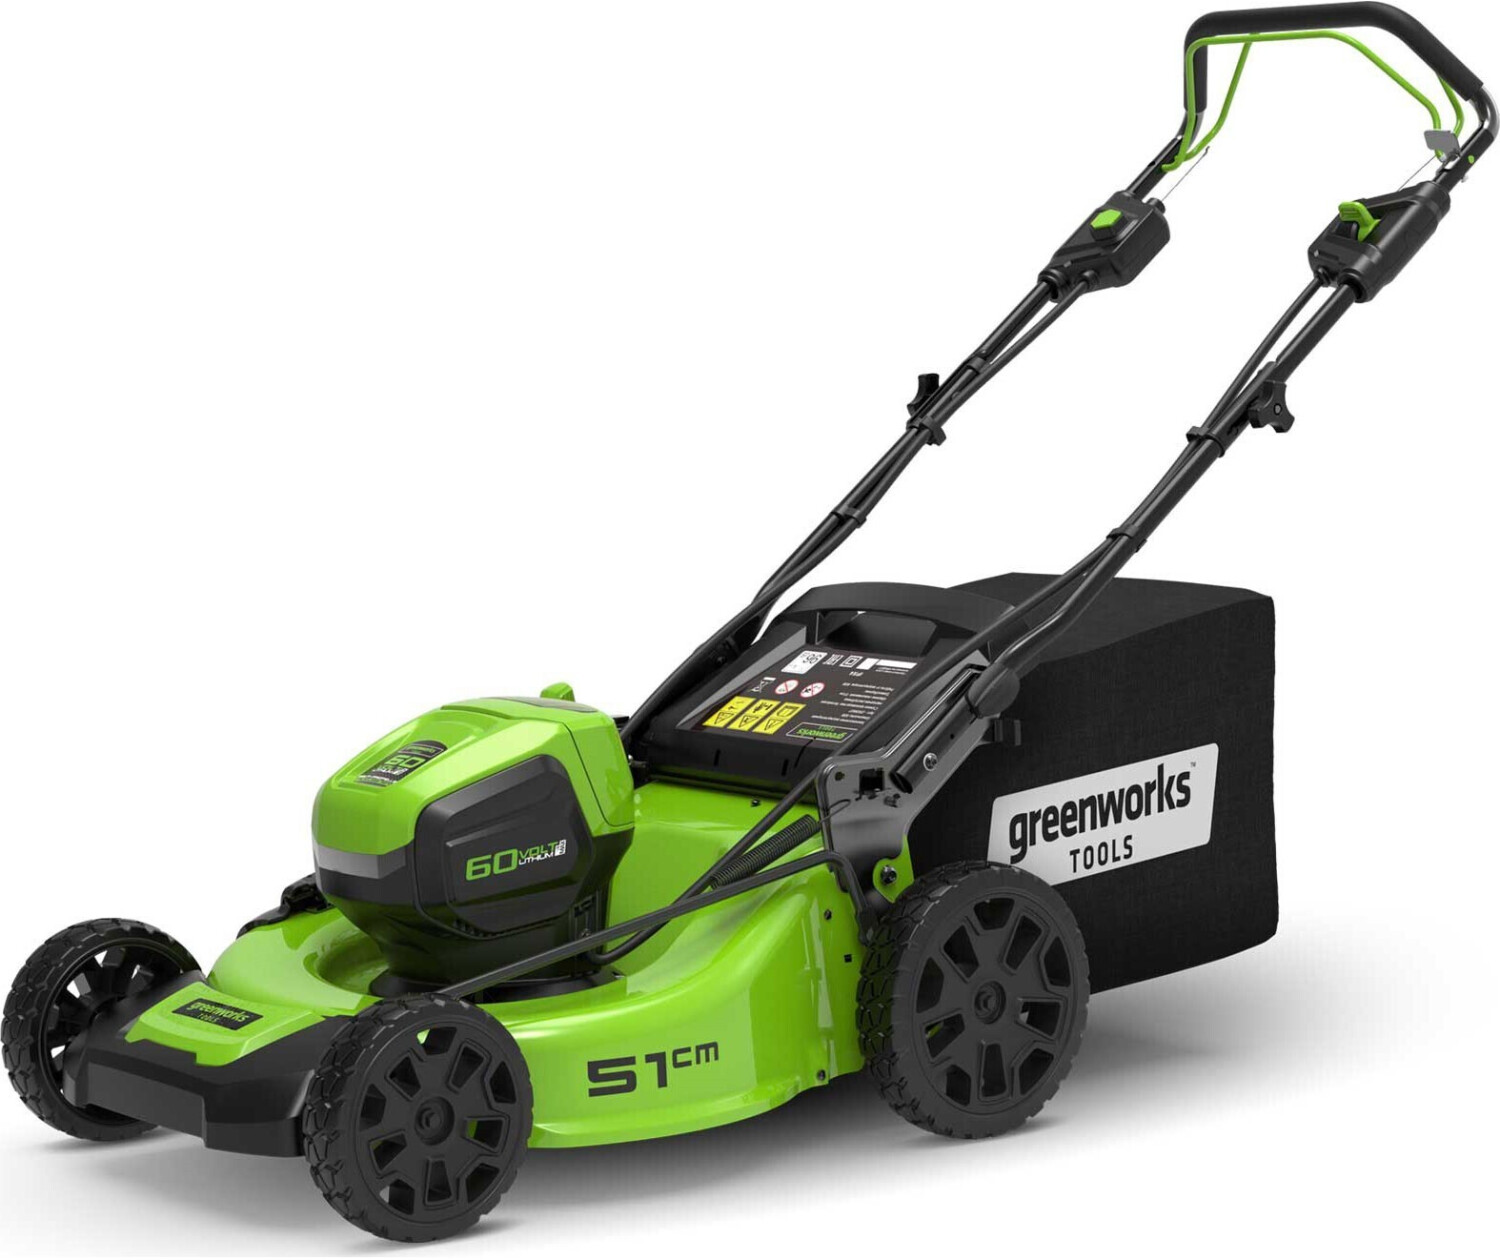 Greenworks GD60LM51SP Cordless 60v Self Propelled Lawn Mower ab 399,00